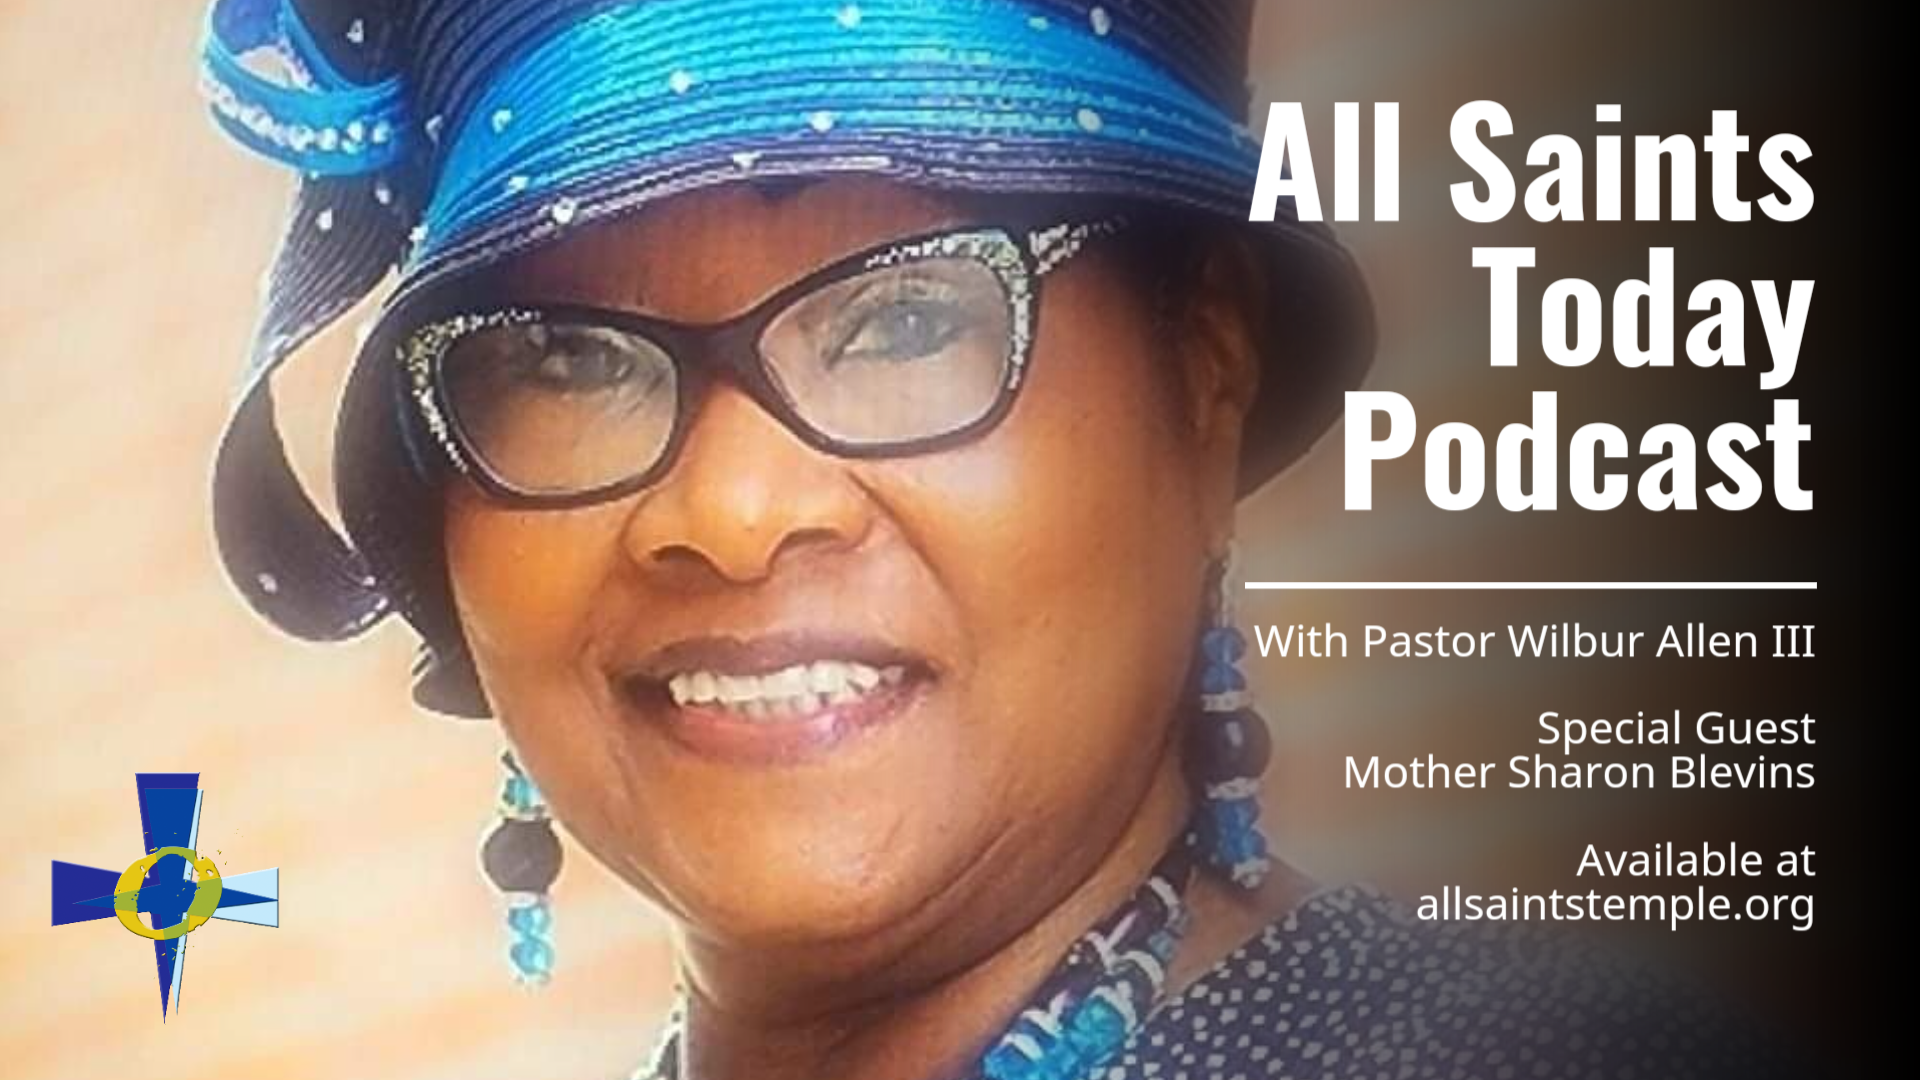 All Saints Today Podcast - Special Guest: Mother Sharon Blevins